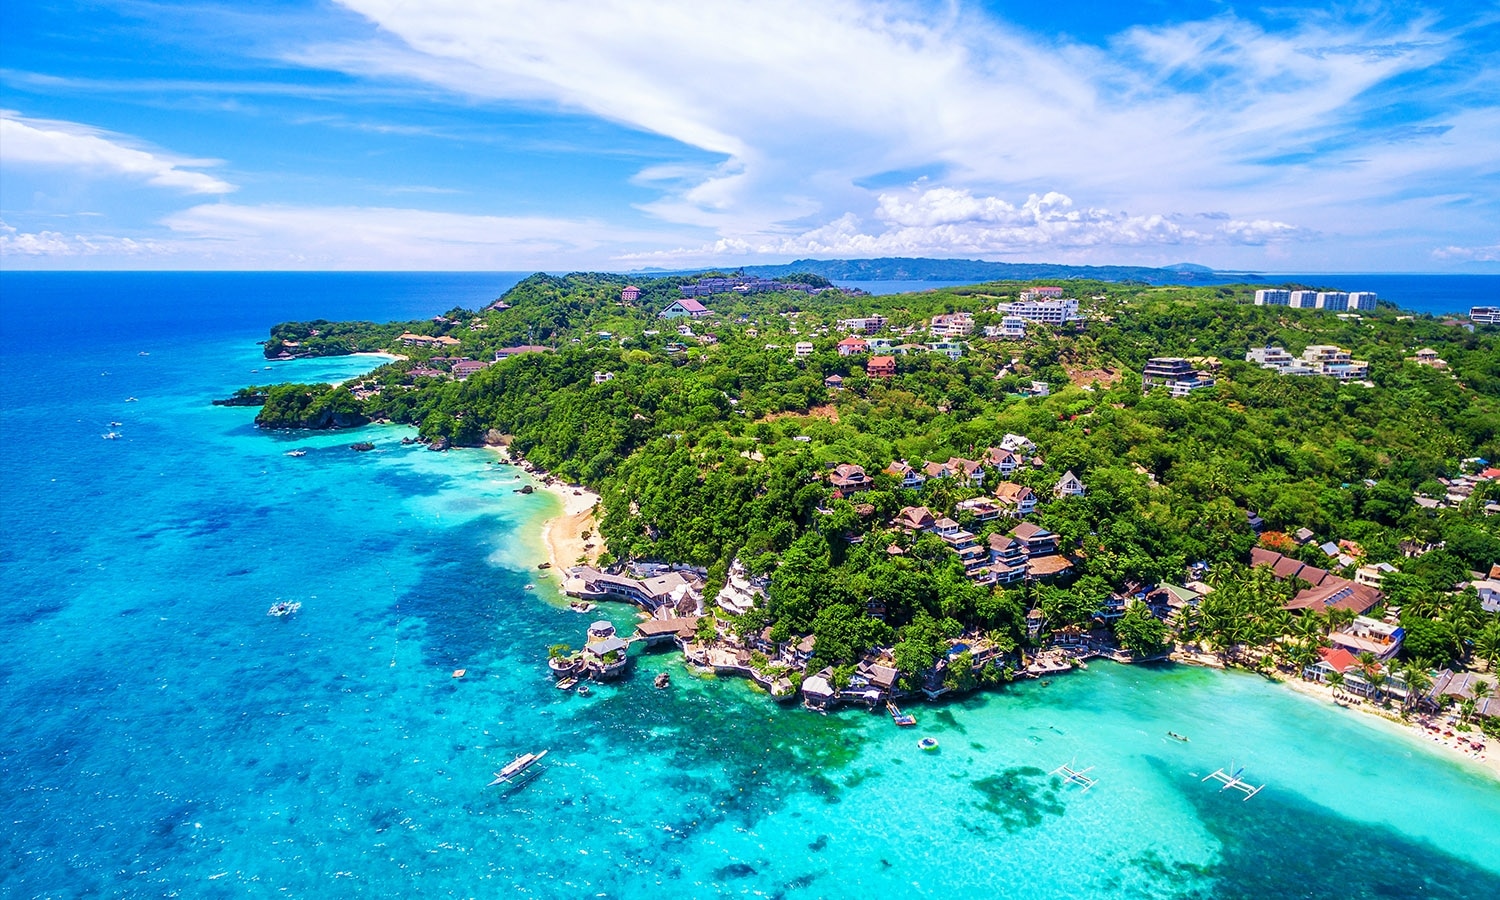 Best Activities to Enjoy While in Boracay